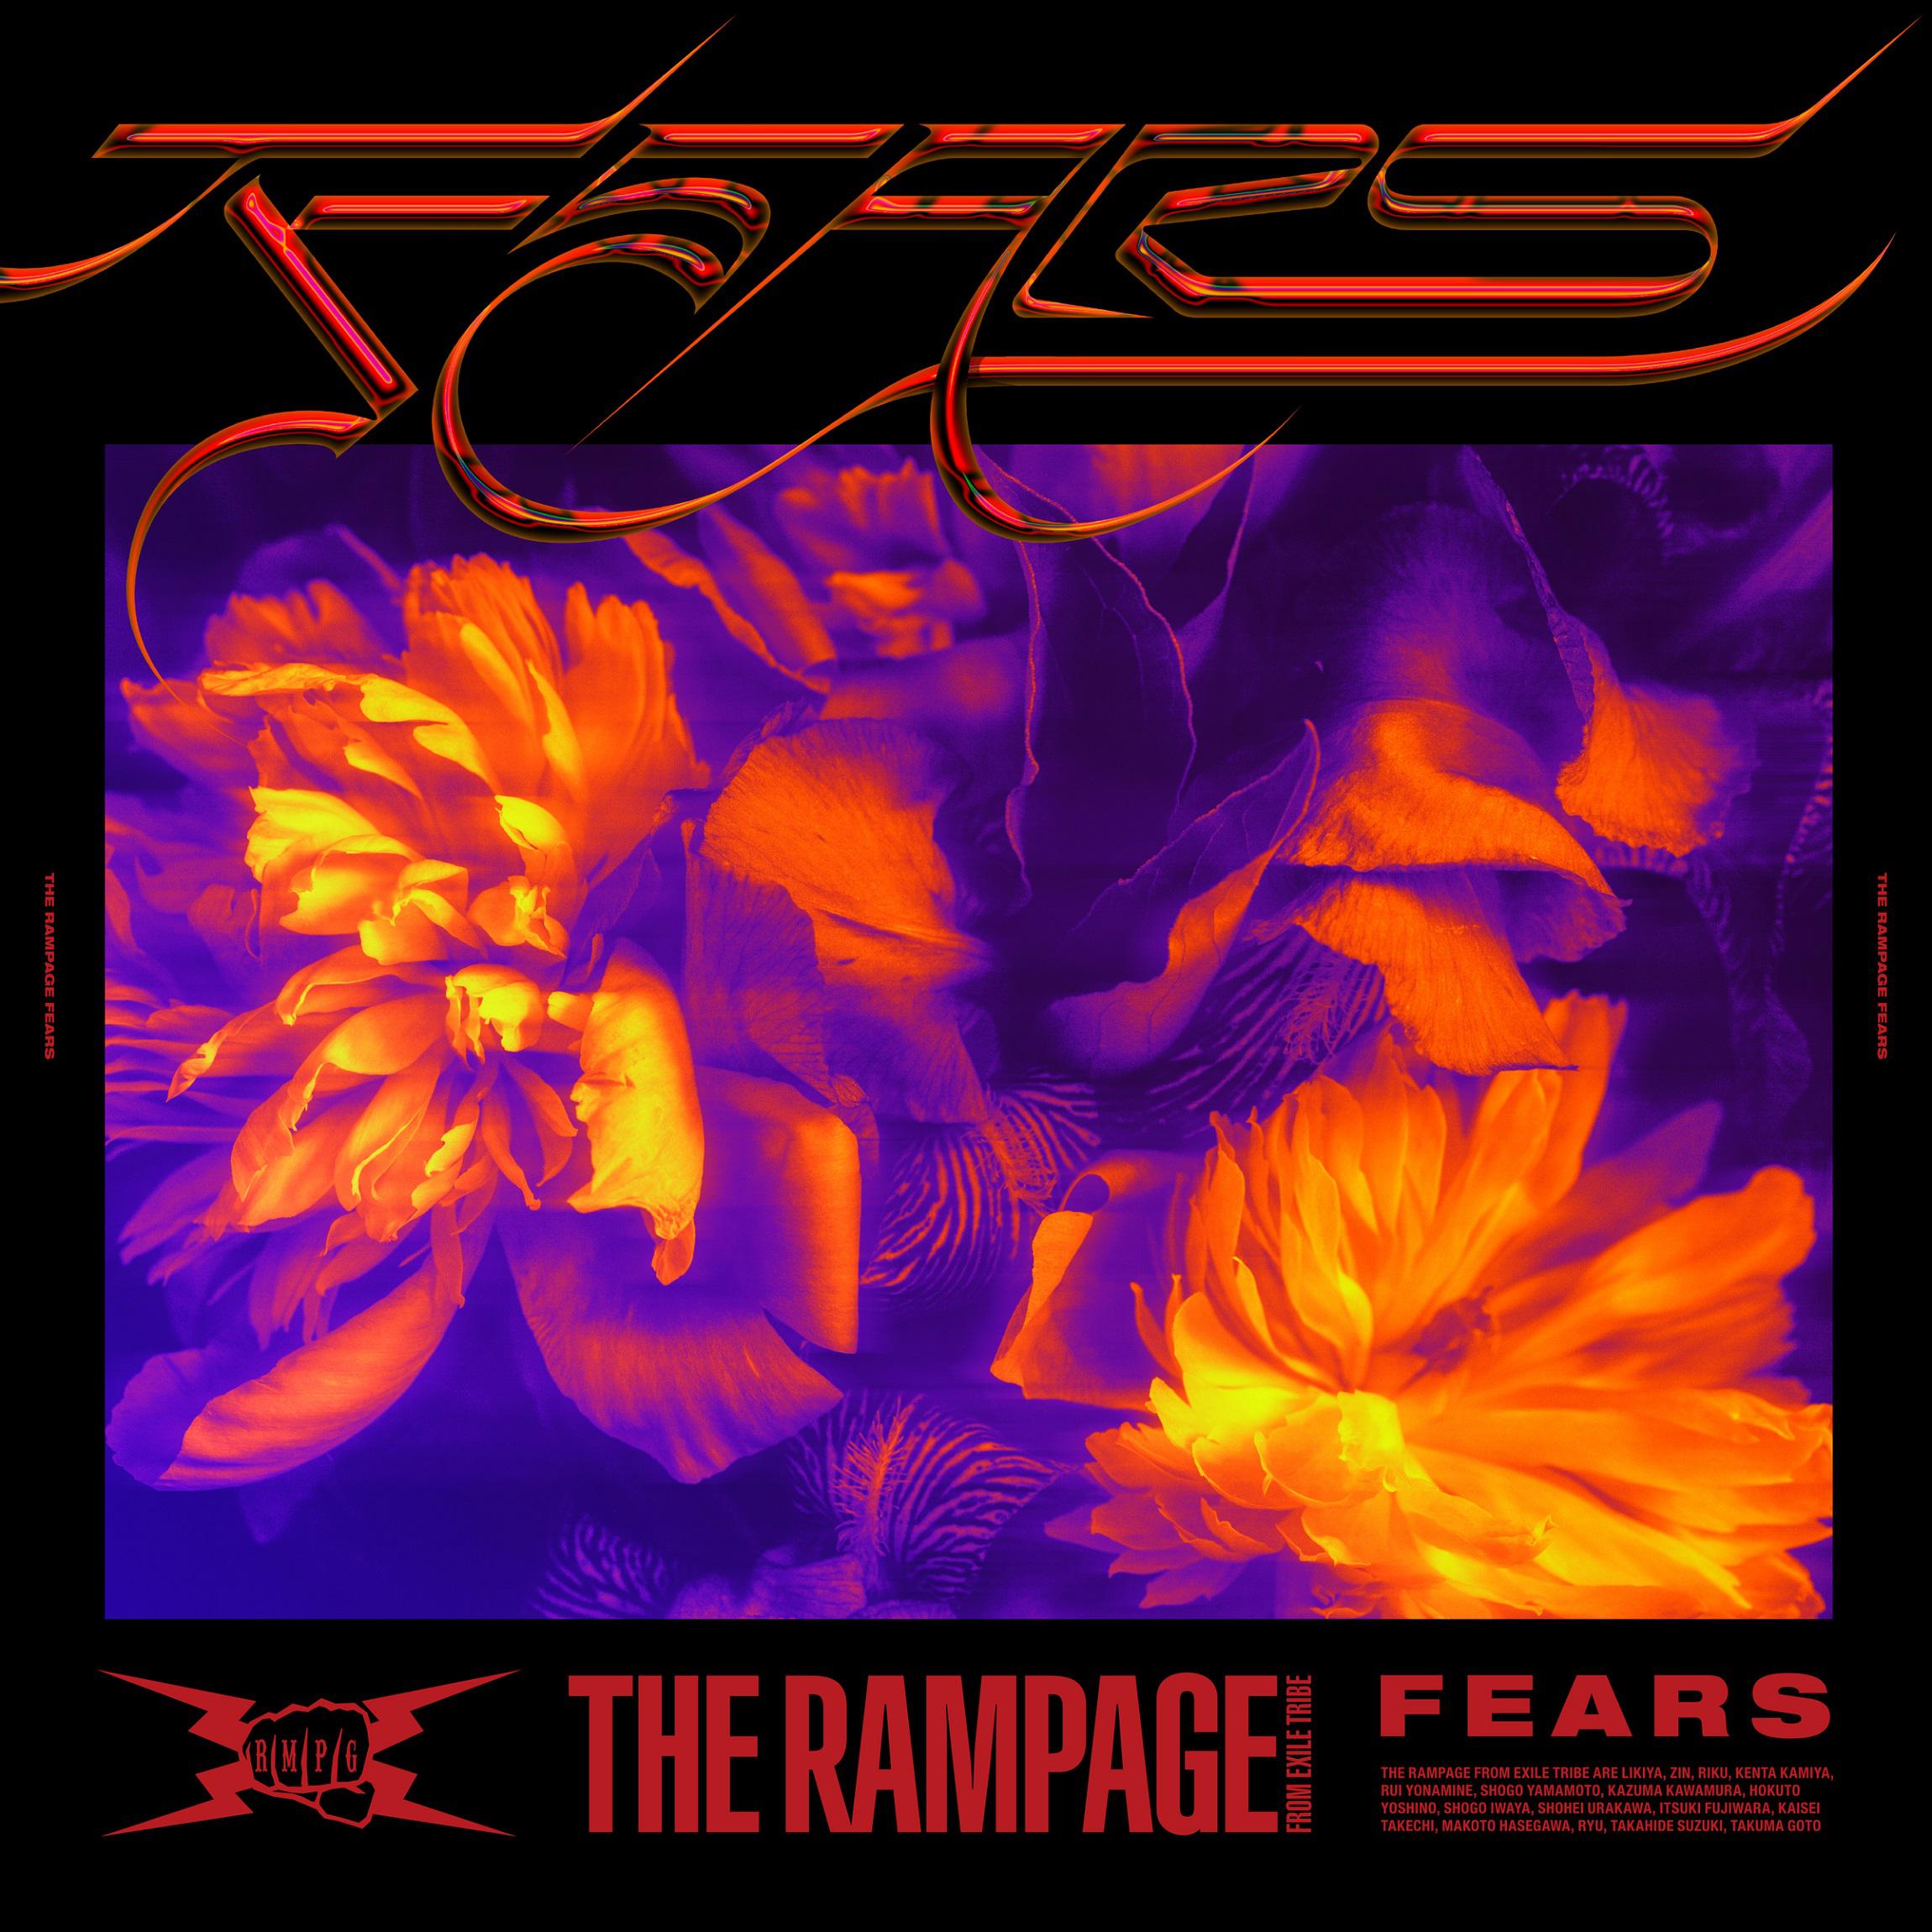 FEARS歌词 歌手THE RAMPAGE from EXILE TRIBE-专辑FEARS-单曲《FEARS》LRC歌词下载